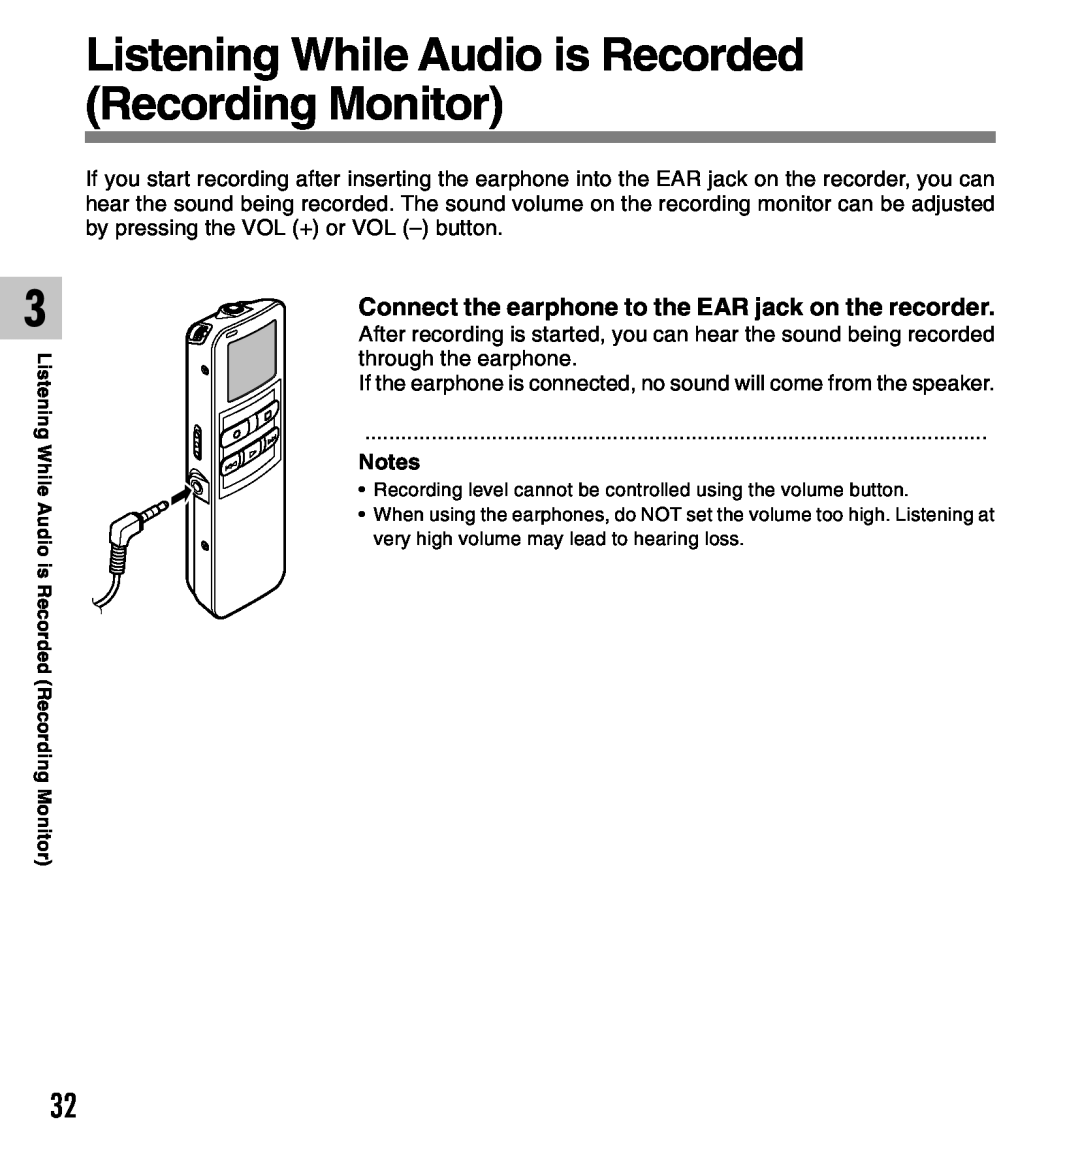 Olympus 2 manual Listening While Audio is Recorded Recording Monitor, Connect the earphone to the EAR jack on the recorder 